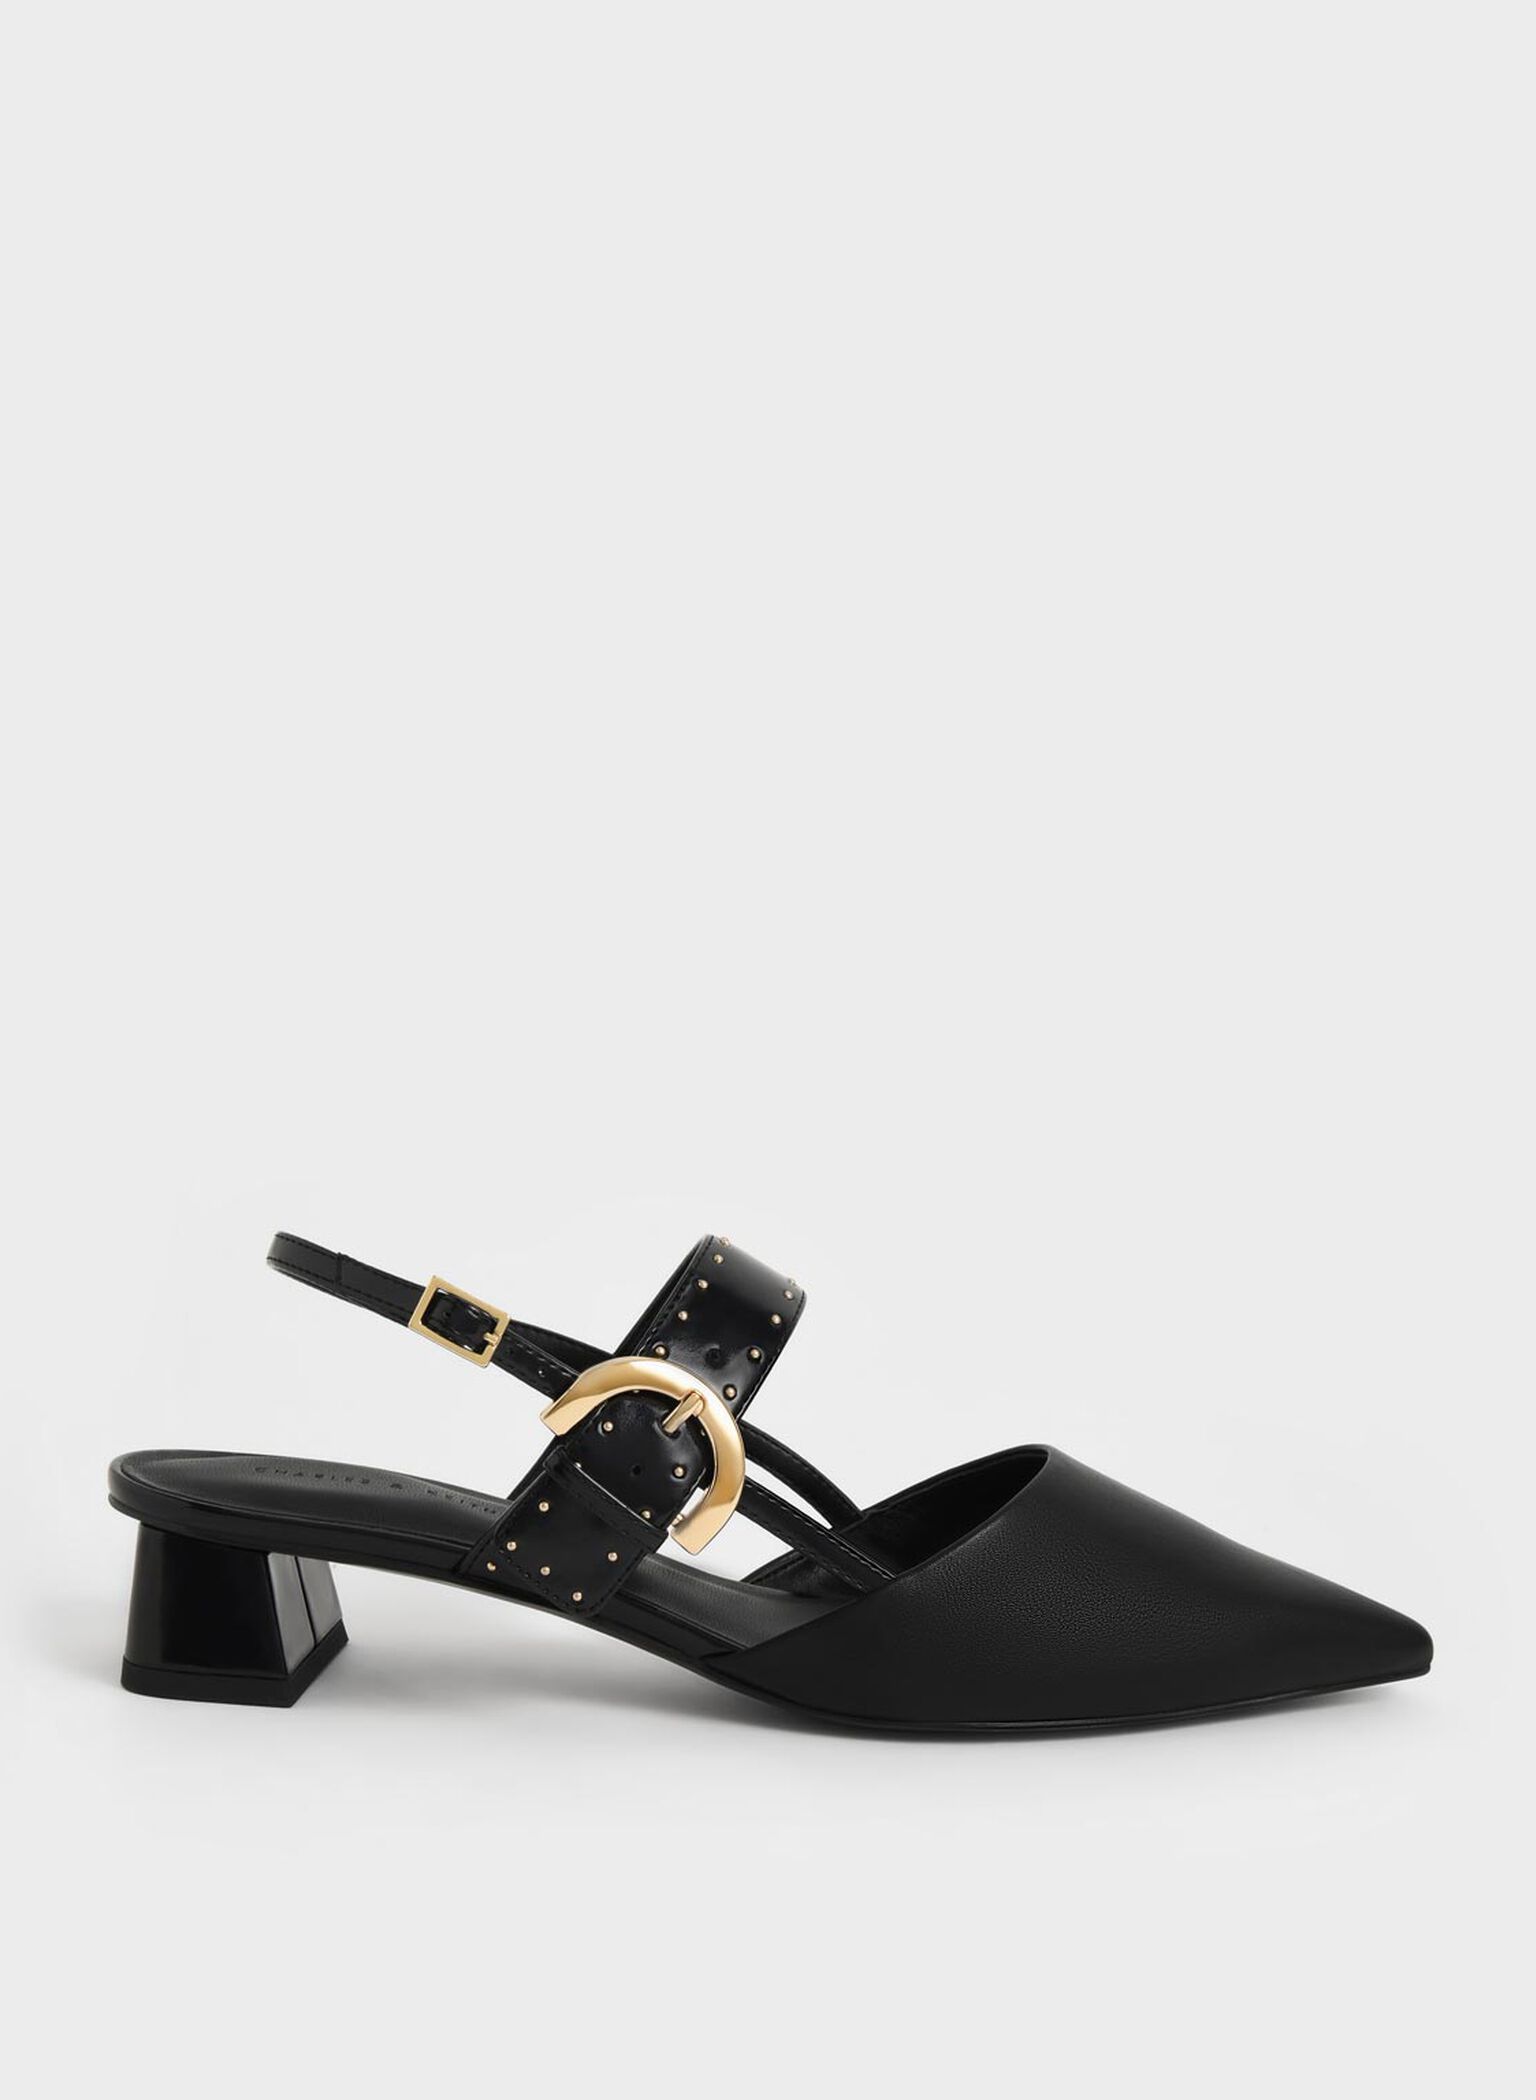 Black Studded Buckled Slingback Pumps - CHARLES & KEITH MY